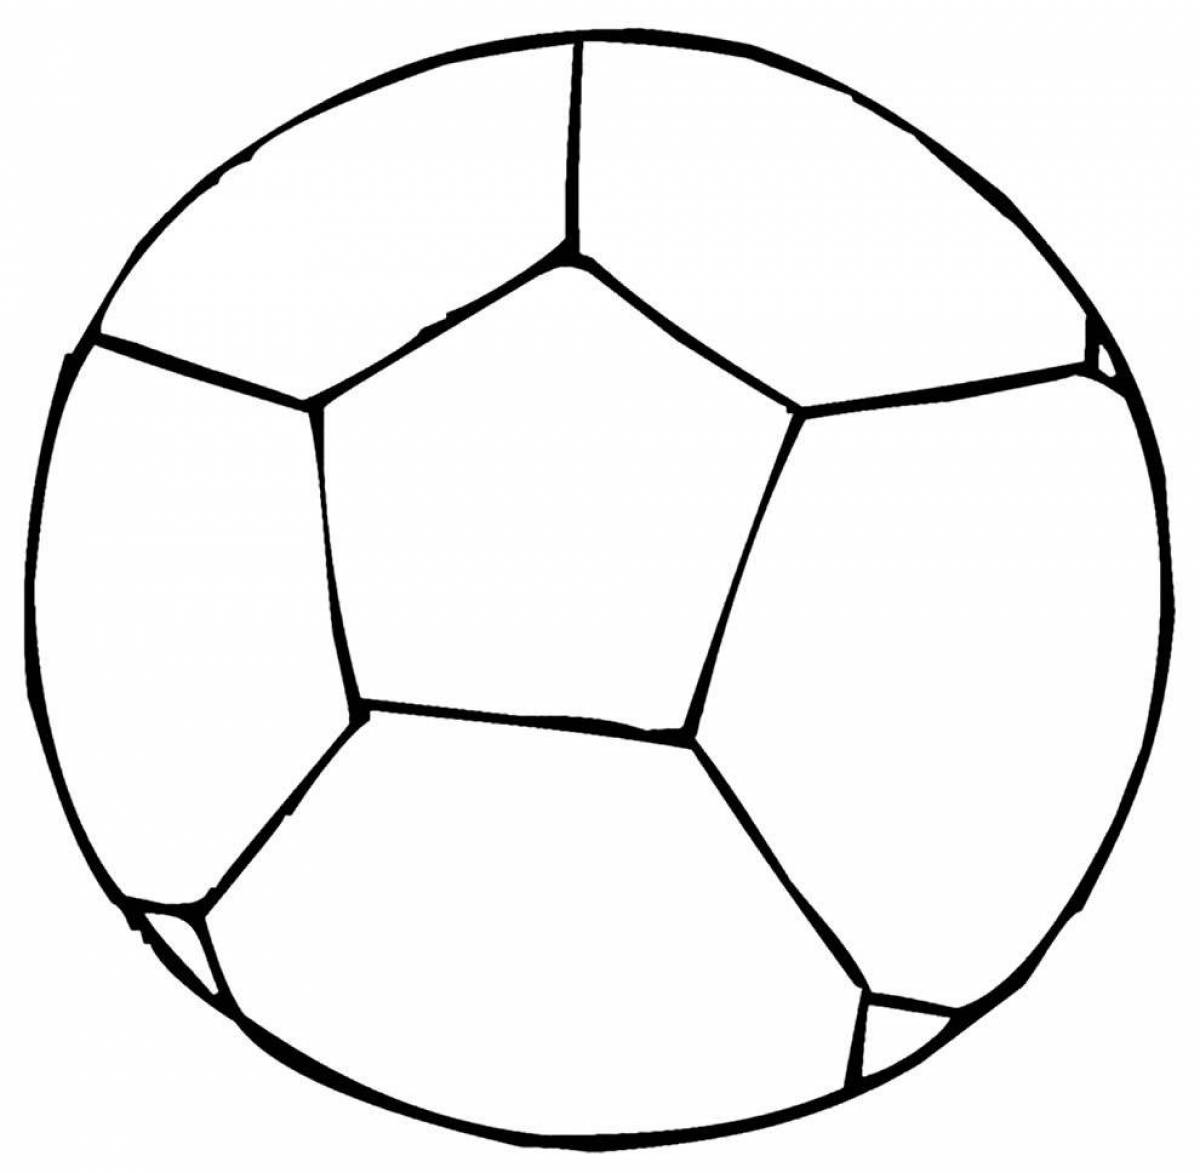 Coloring outstanding soccer ball